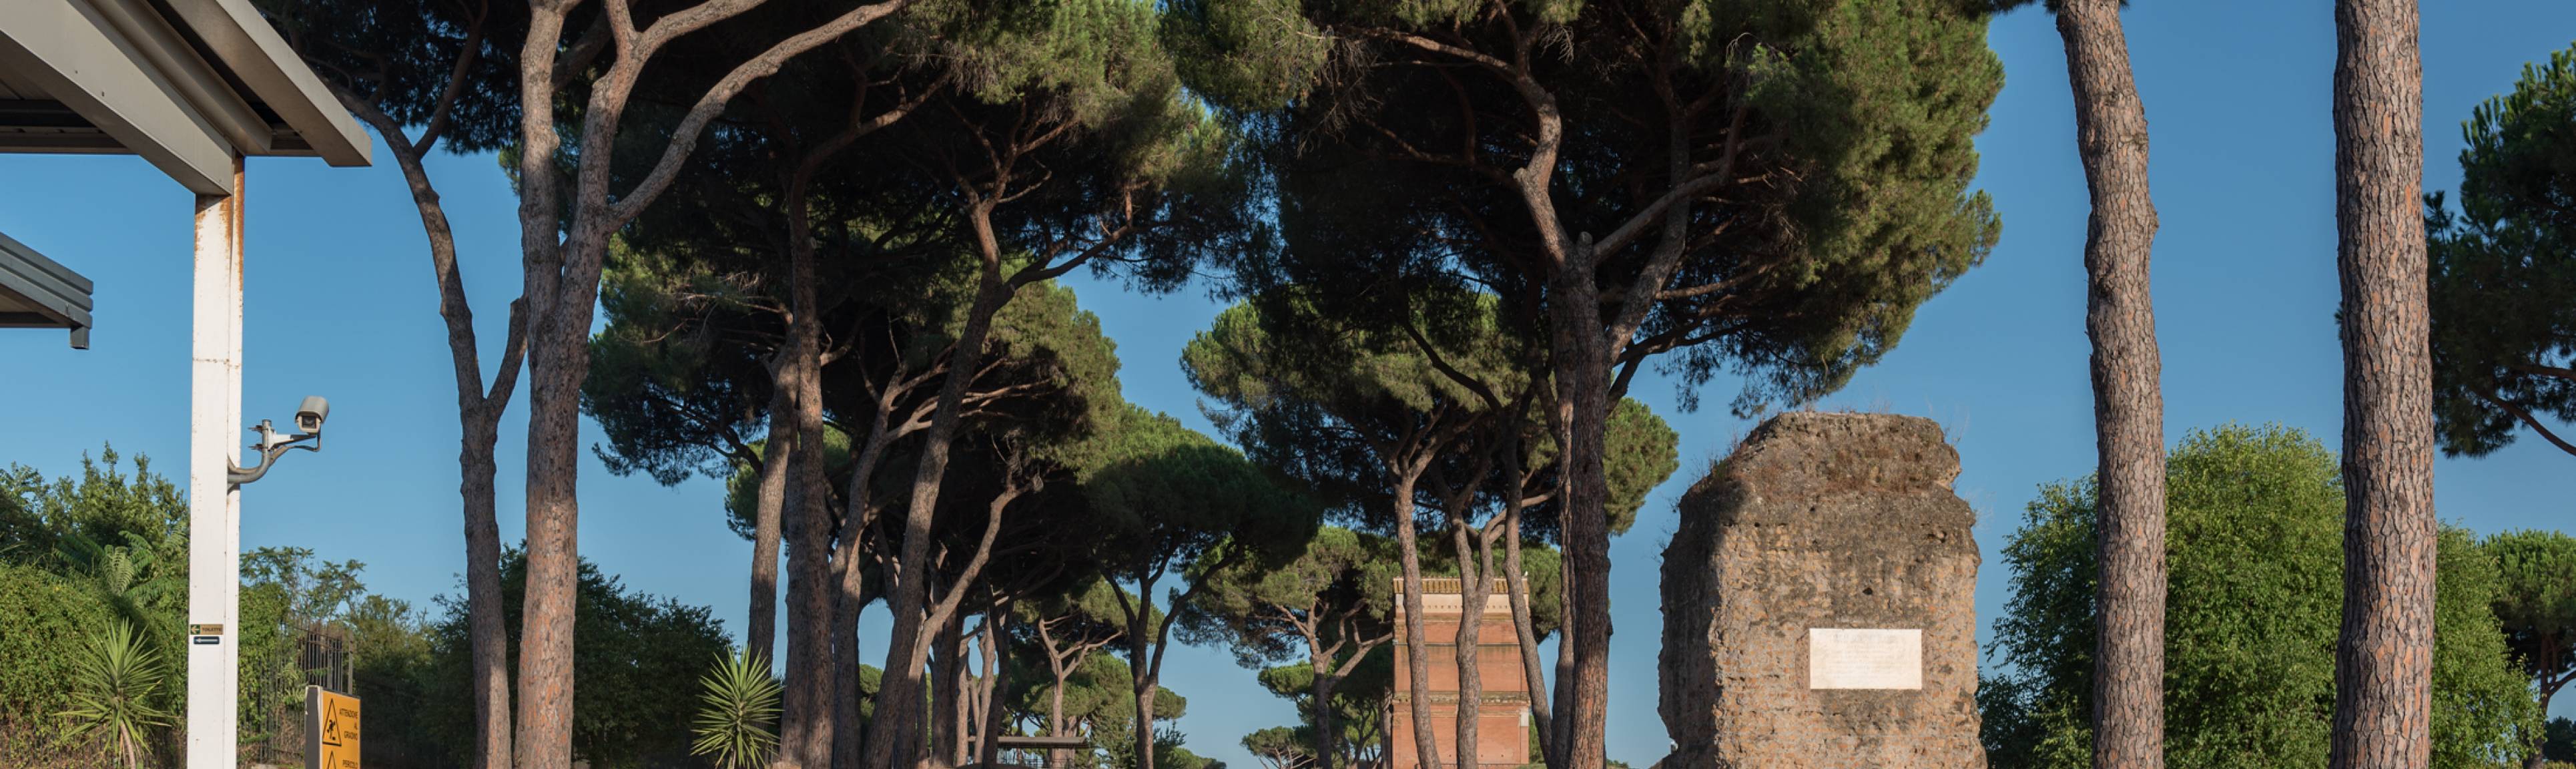 Tree lined view of the Appian Way near the Catacombs in Rome